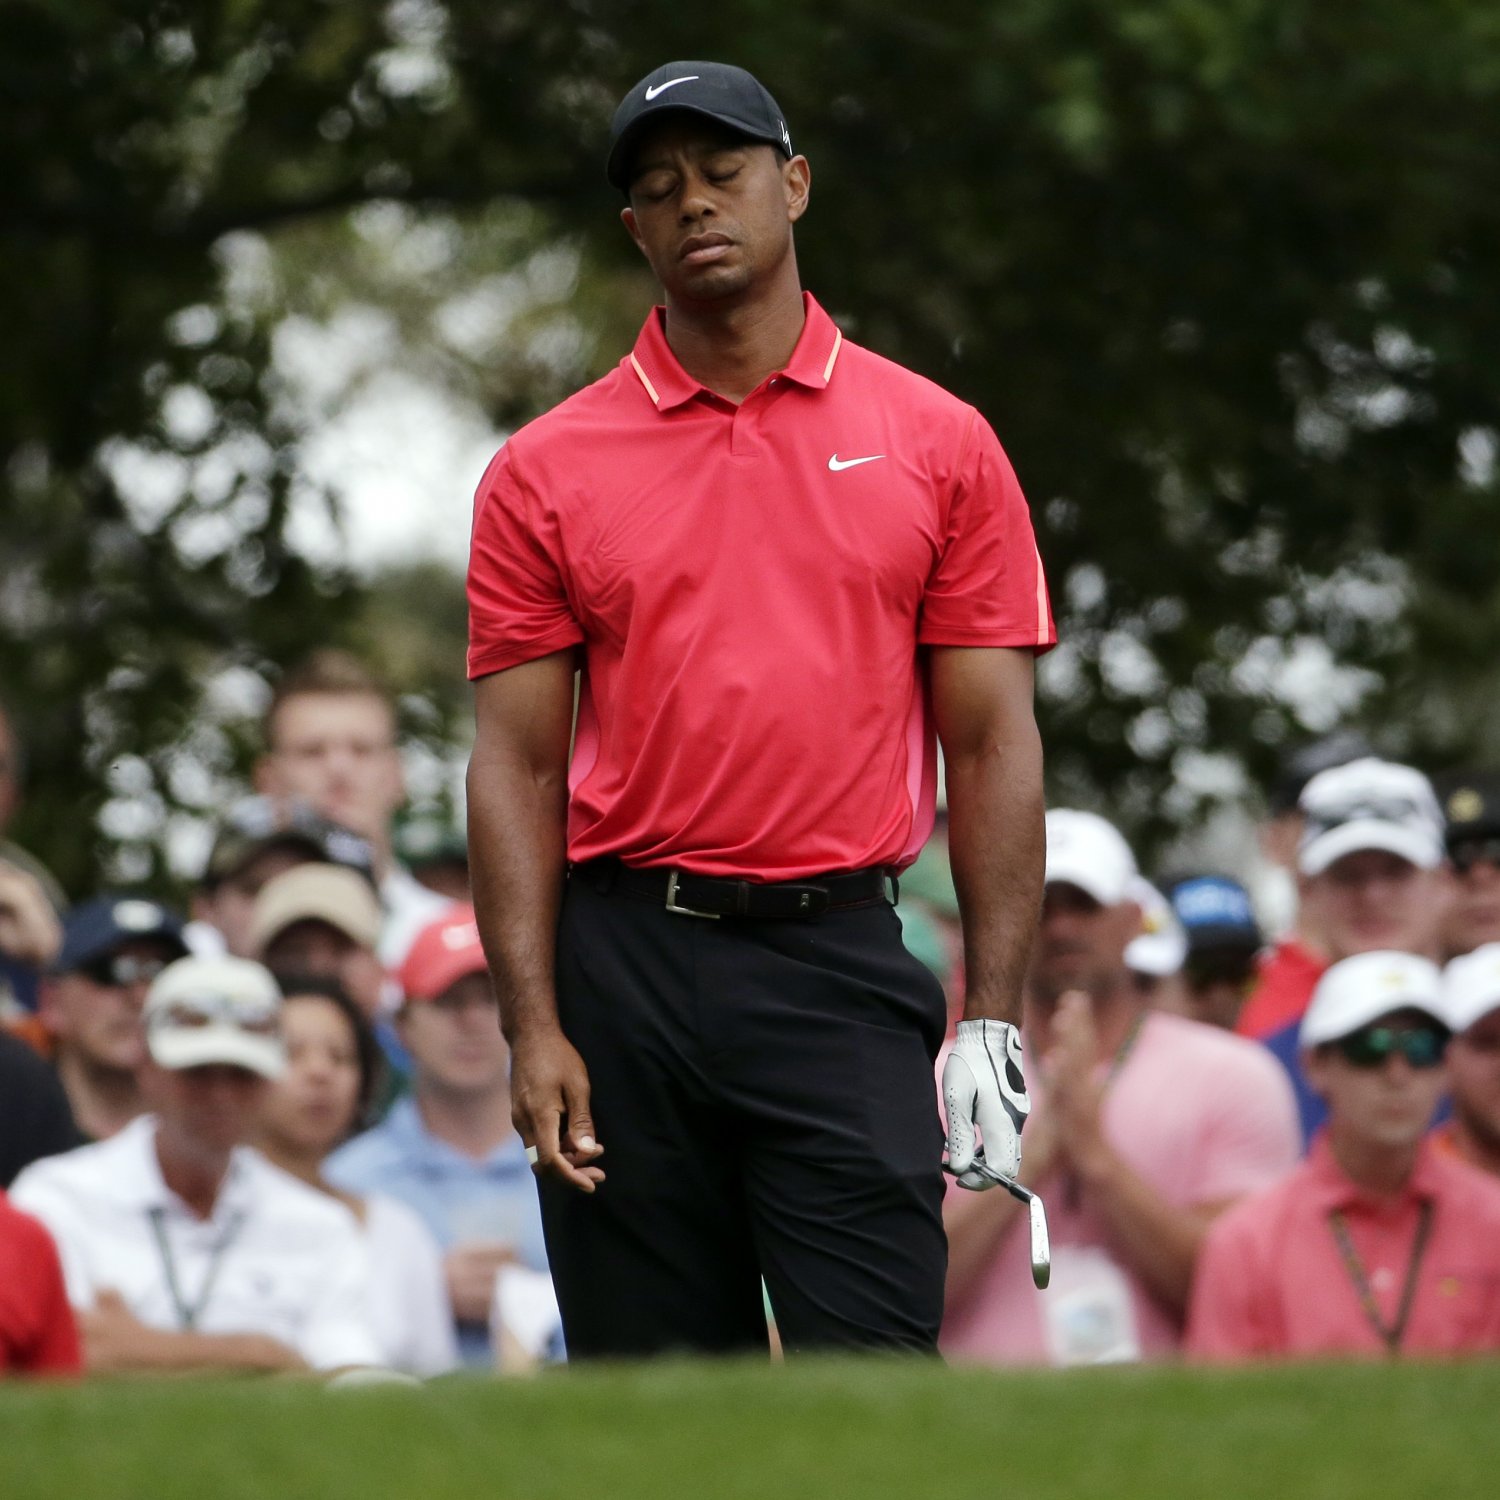 Tiger Woods Injury Update: Agent Says Golfer's Wrist Is 'Fine' After Masters ...